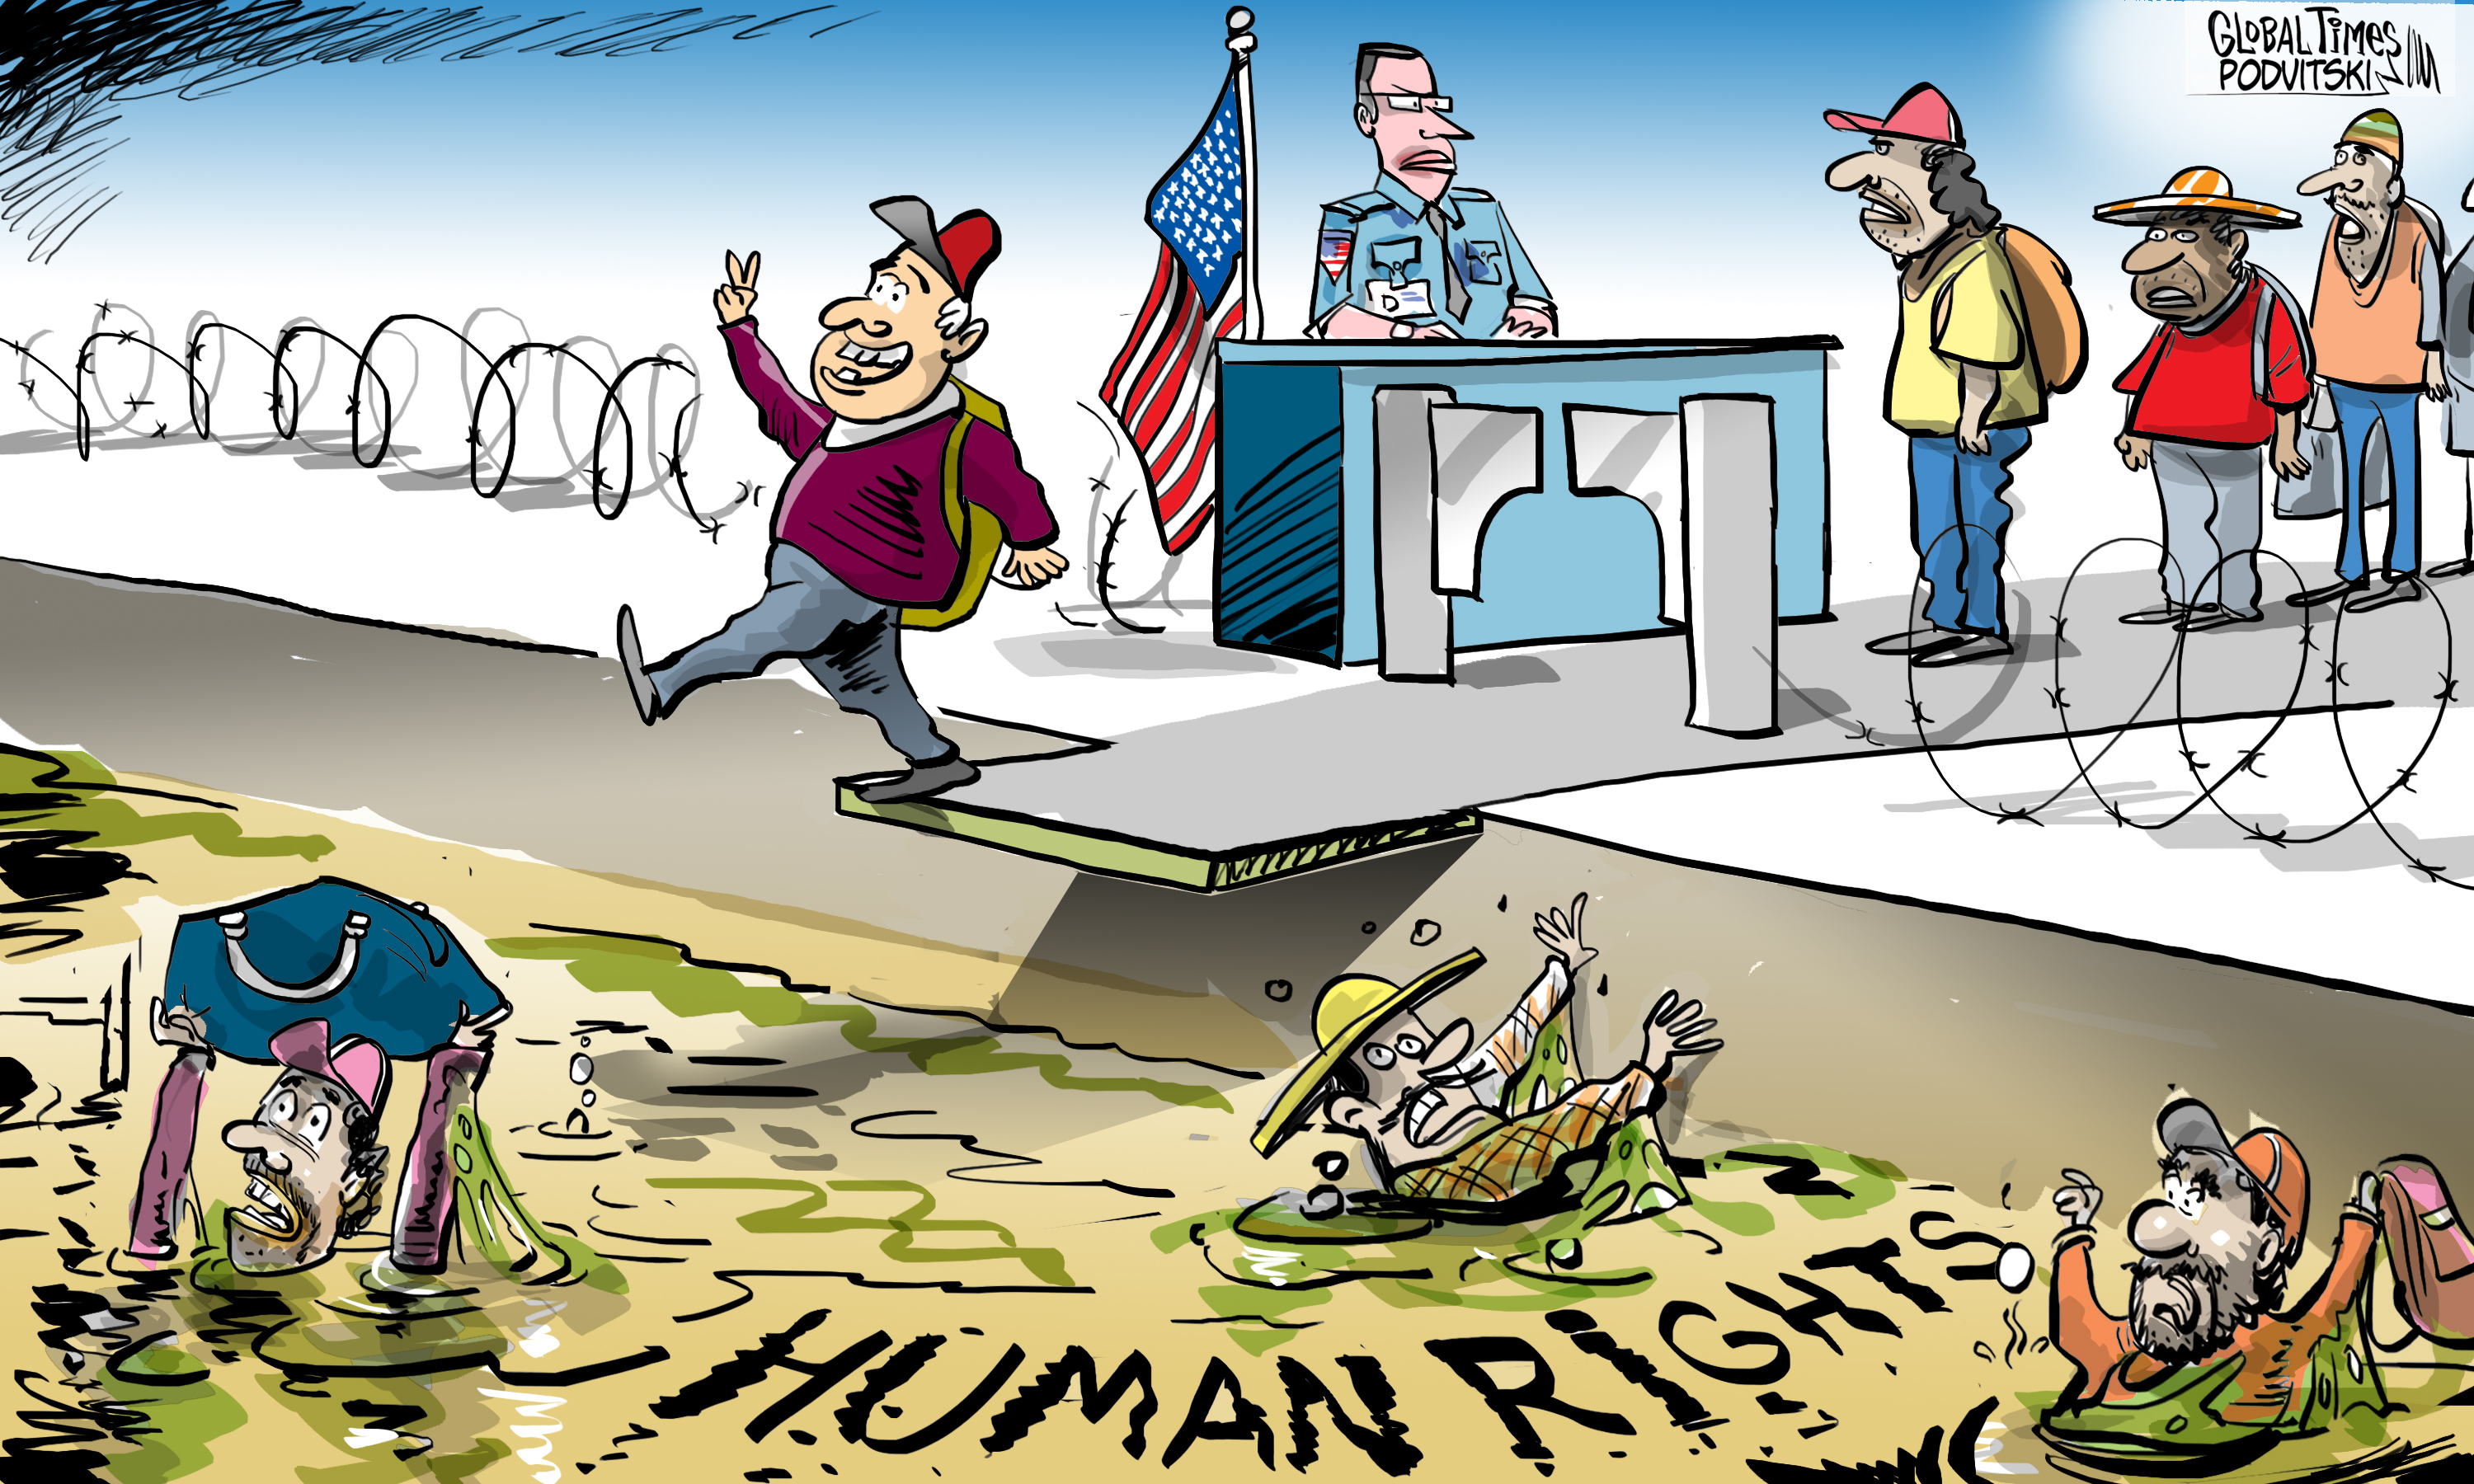 Are migrants on a pathway to the American Dream or a human rights nightmare? Cartoon: Vitaly Podvitski